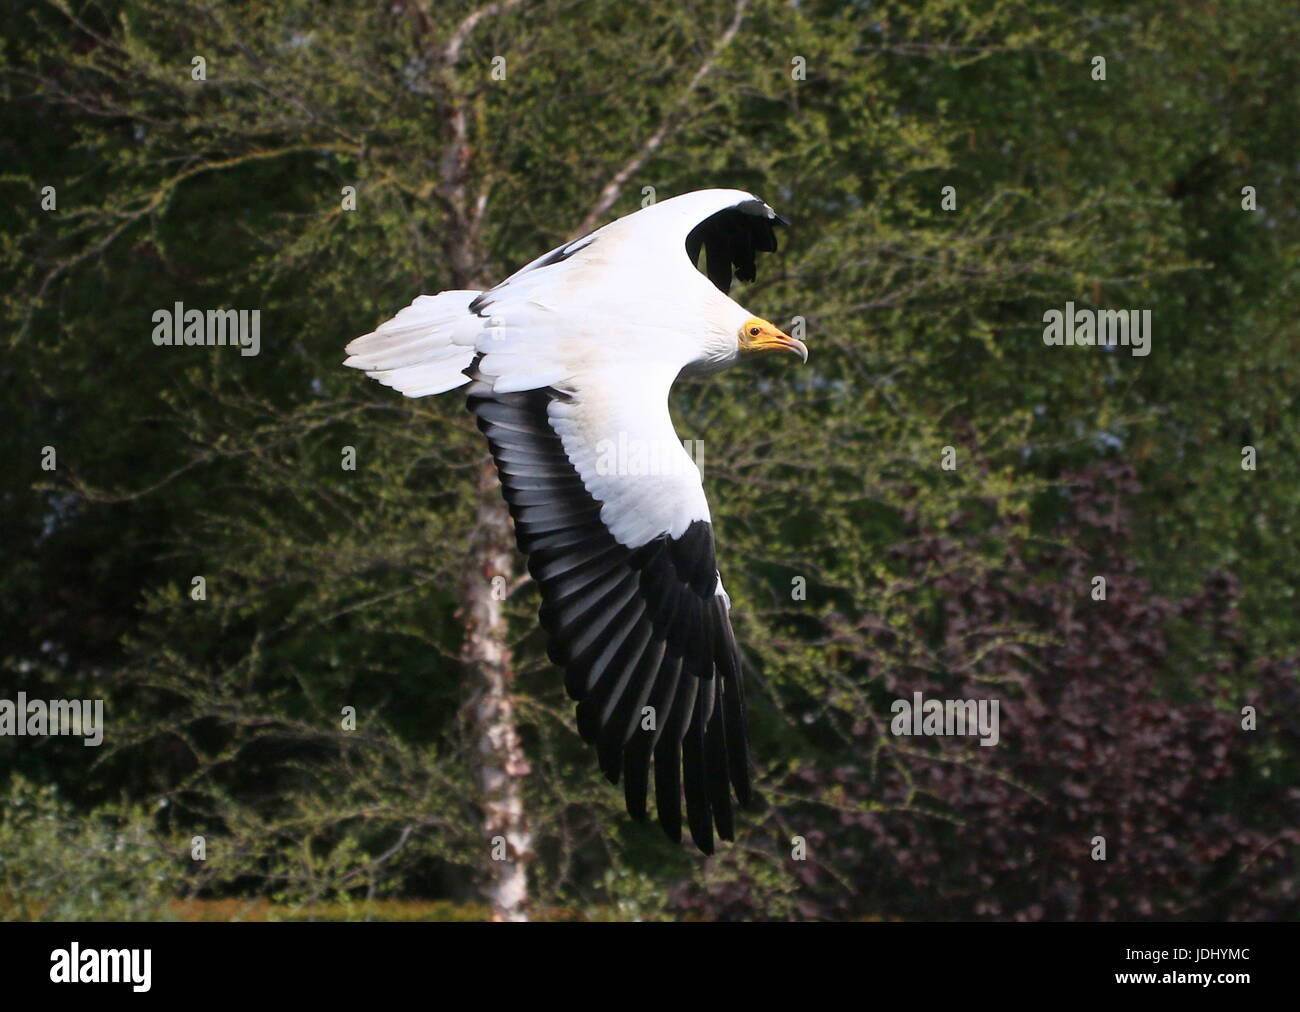 Egyptian vulture or African White scavenger vulture (Neophron percnopterus) in flight. Stock Photo